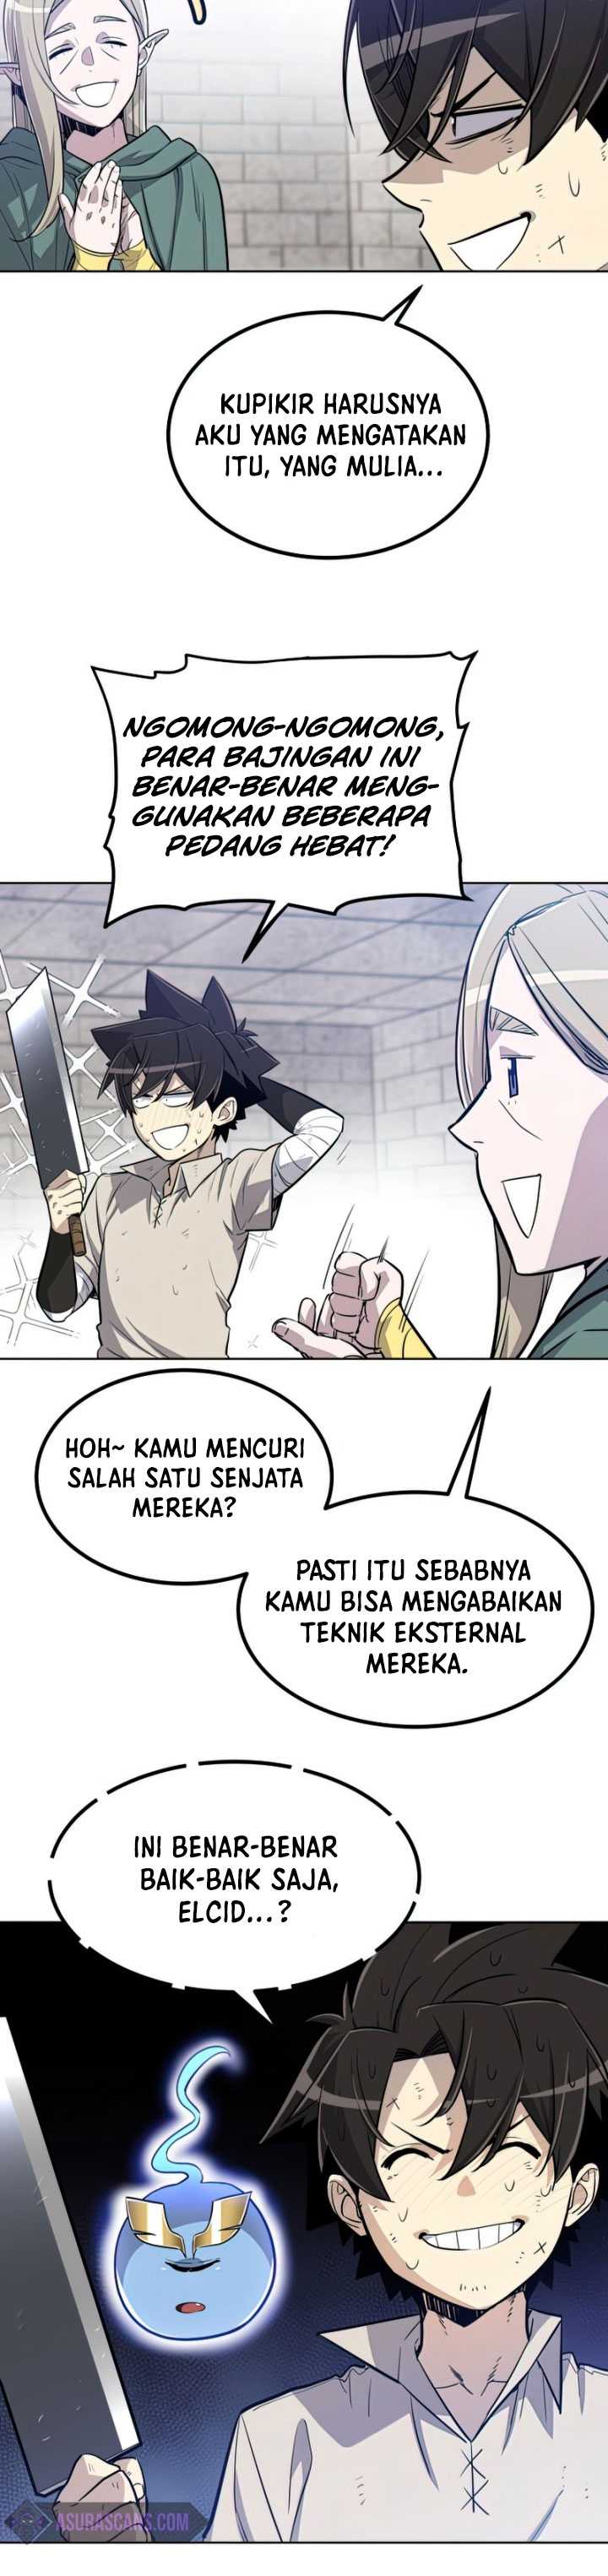 Overpowered Sword Chapter 29 5